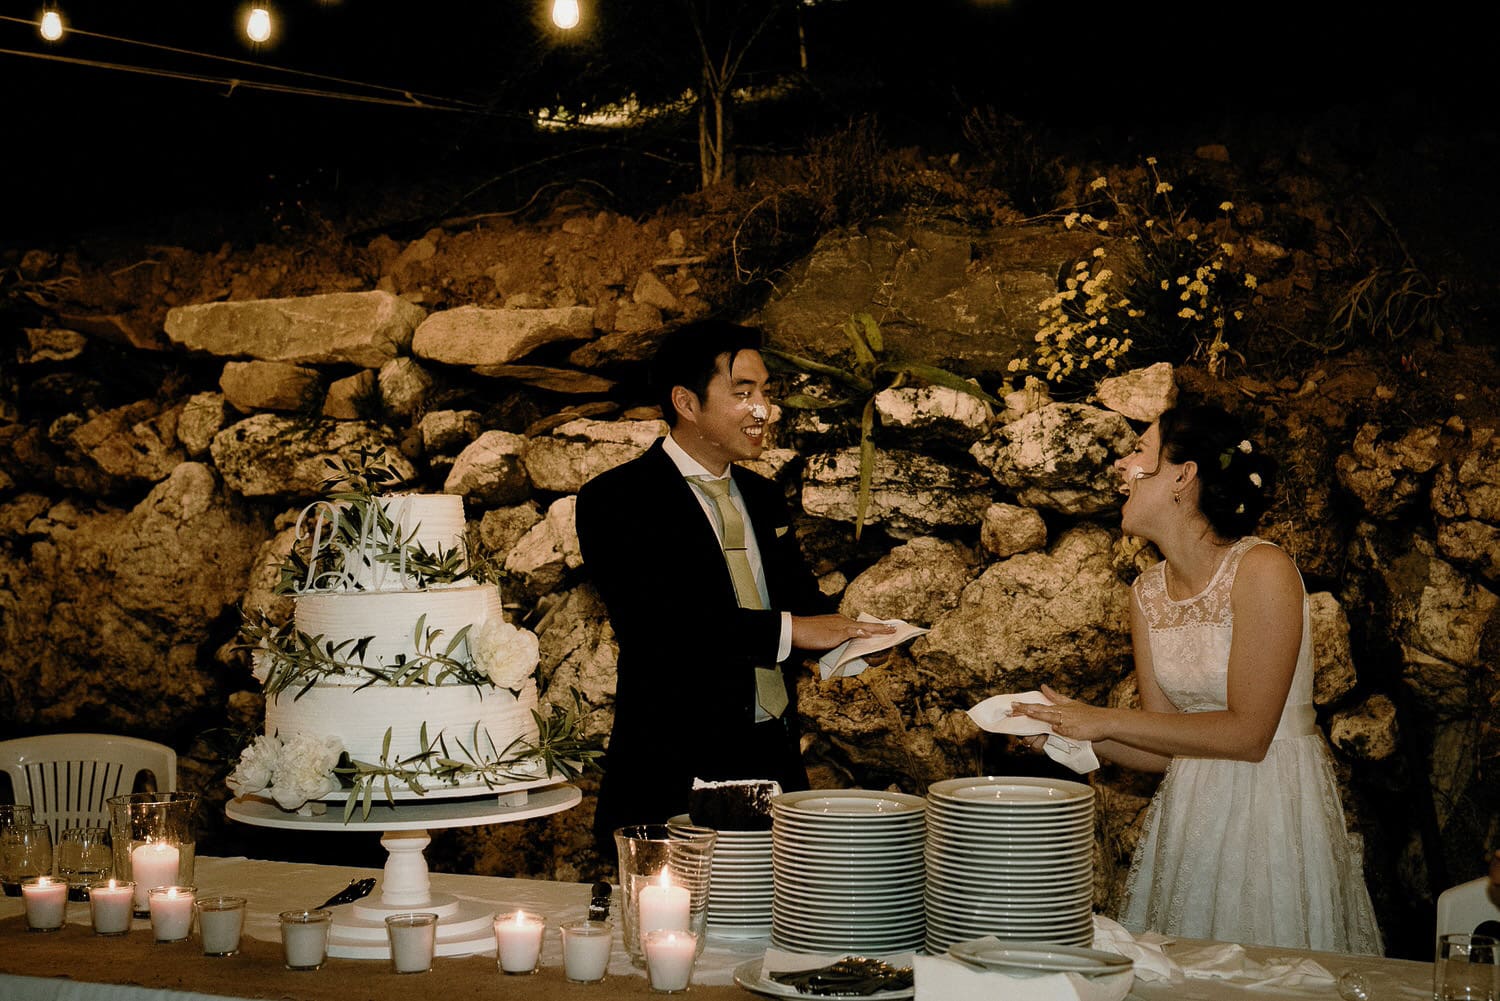 Charming Destination Wedding in the Portuguese Countryside - bride and groom putting cake on each other's faces